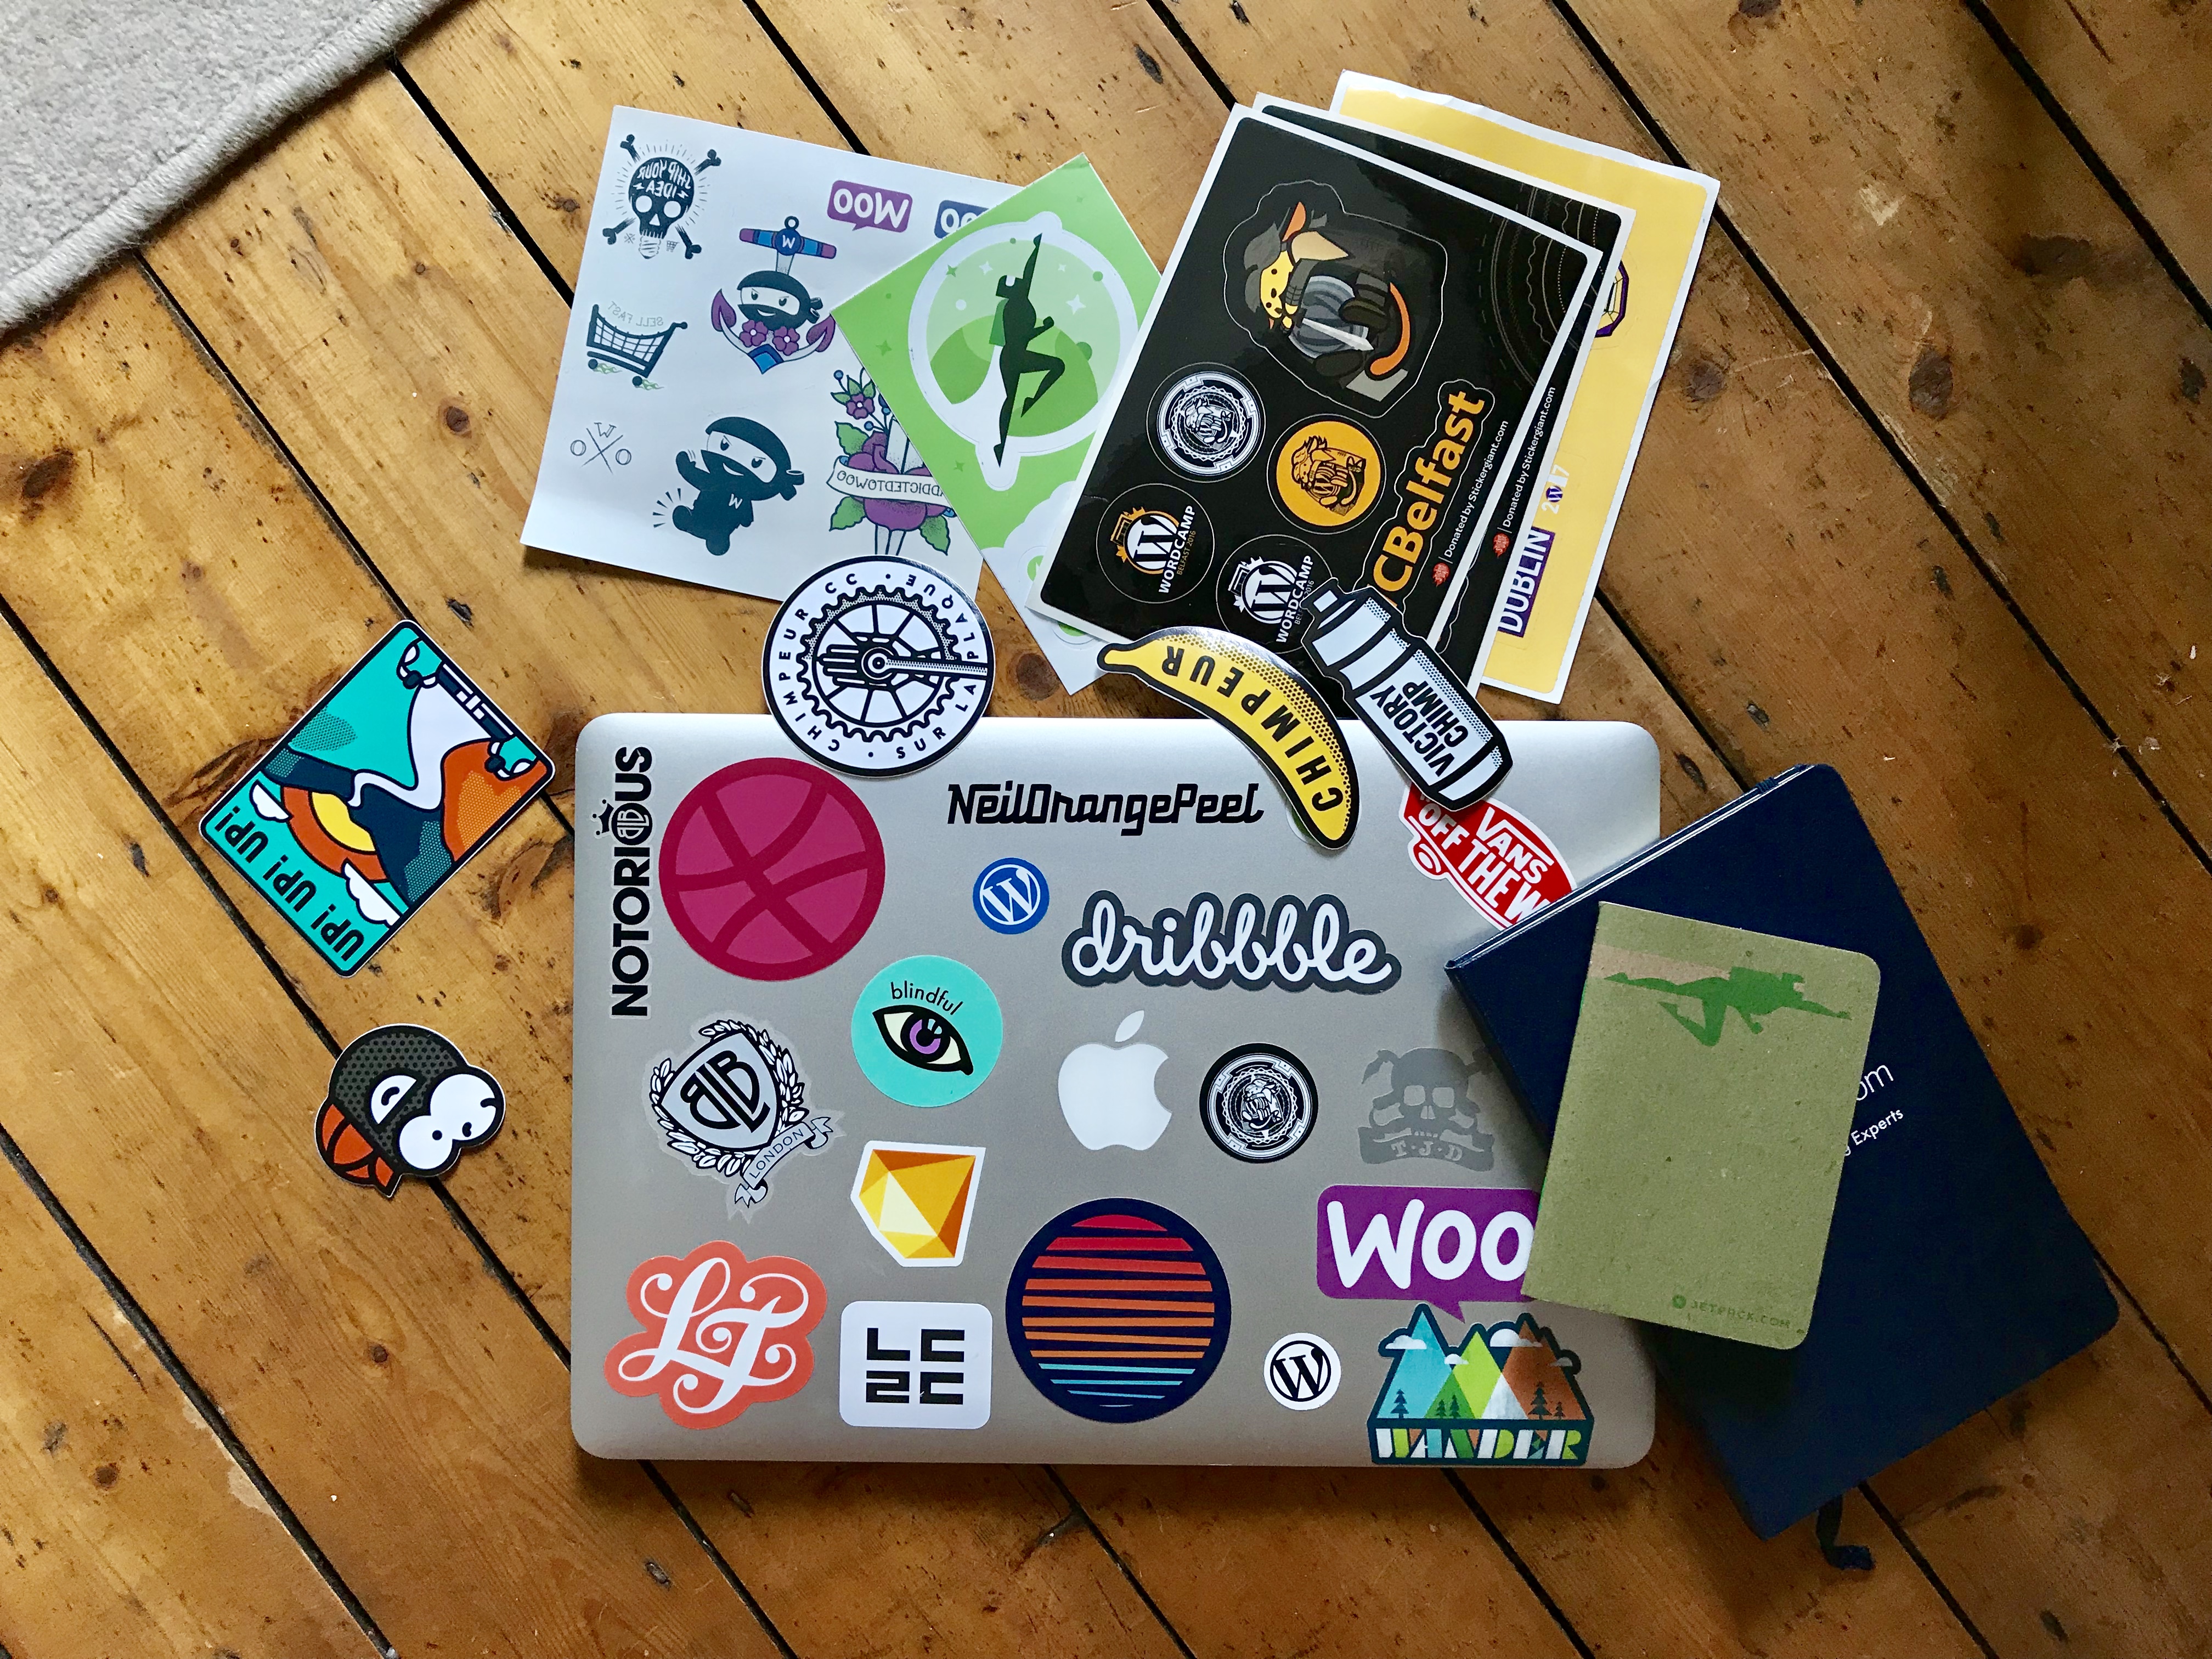 Laptop covered in stickers